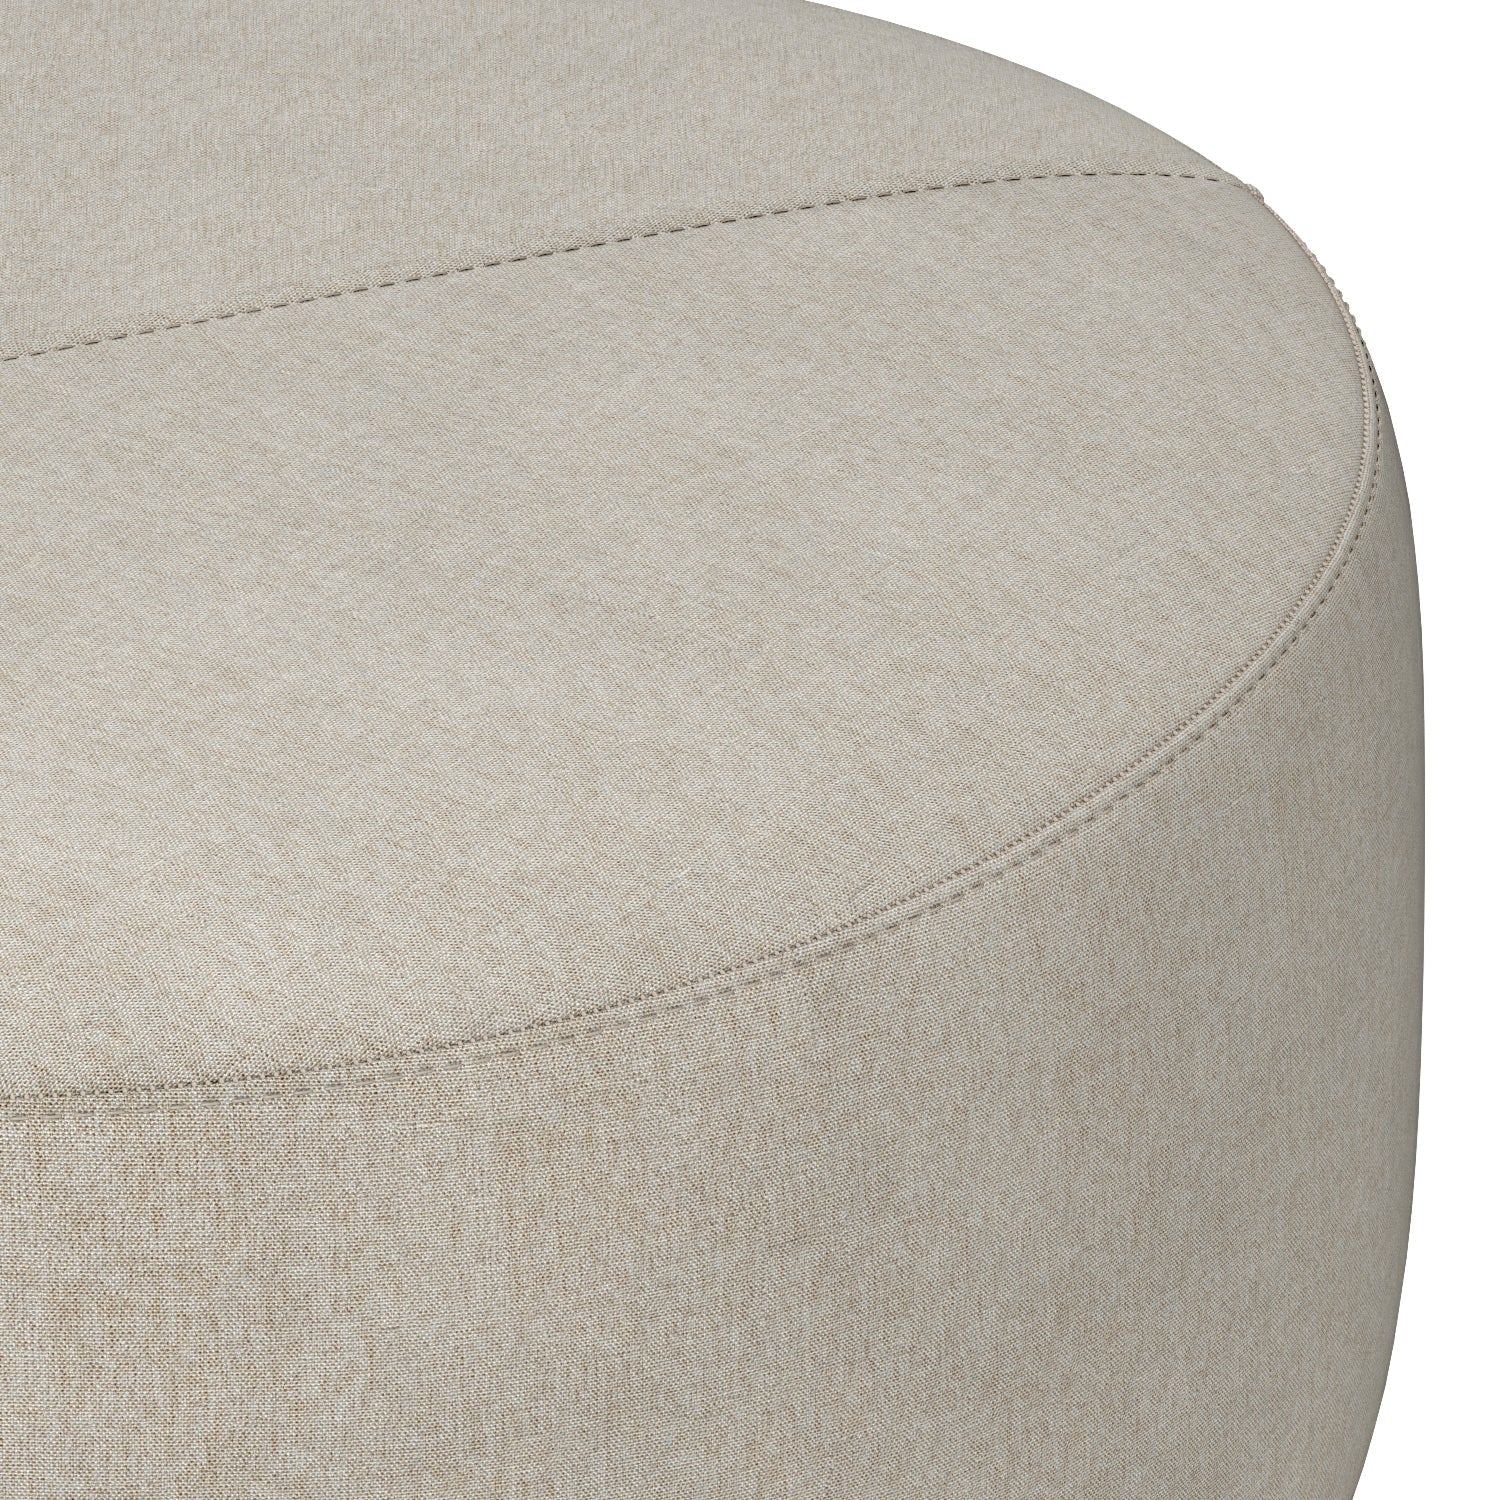 Spectra Large Ottoman with Comfort Foam - Ottomans